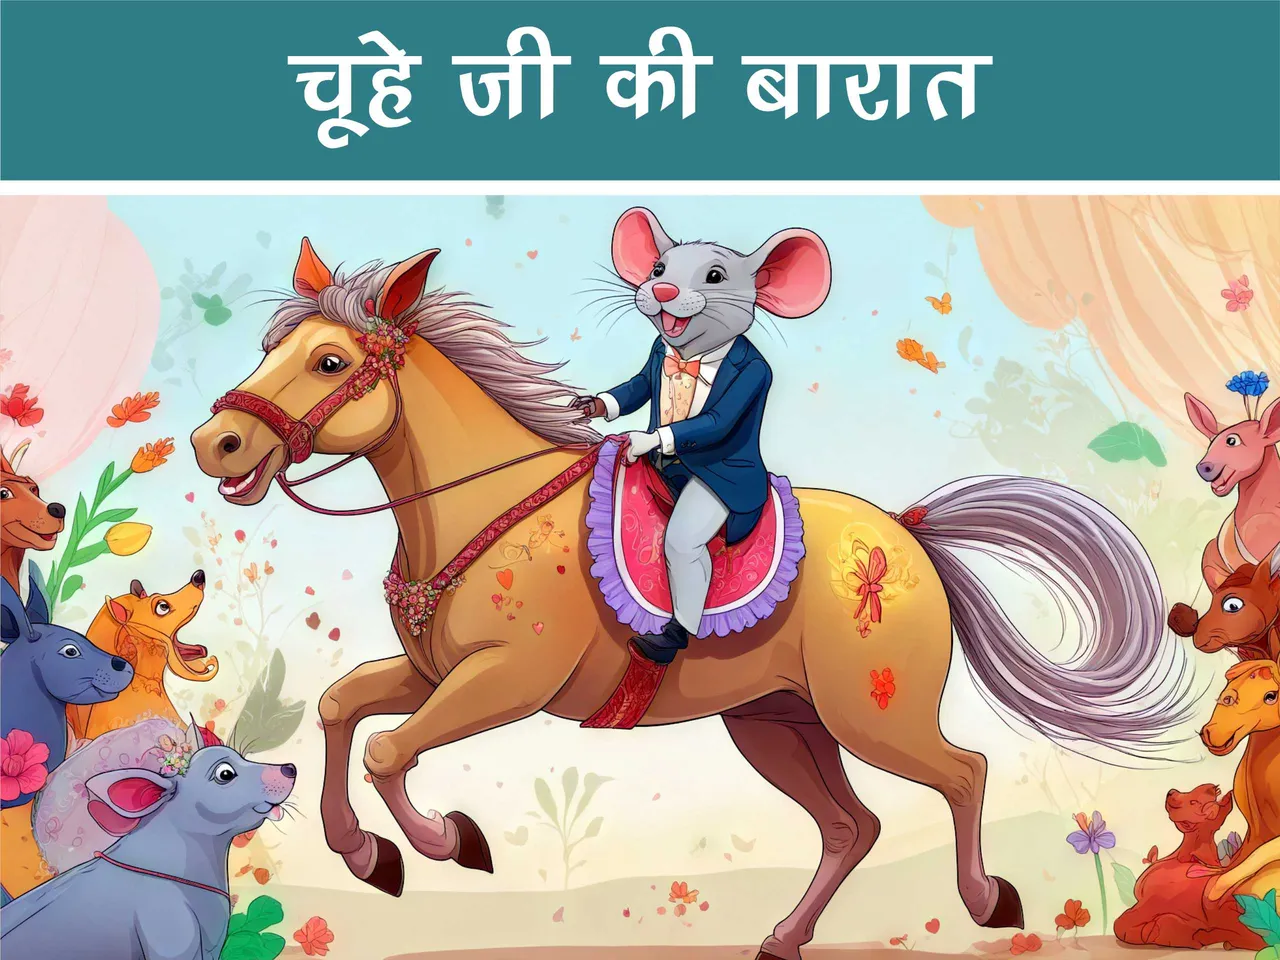 cartoon image of a mouse riding a horse